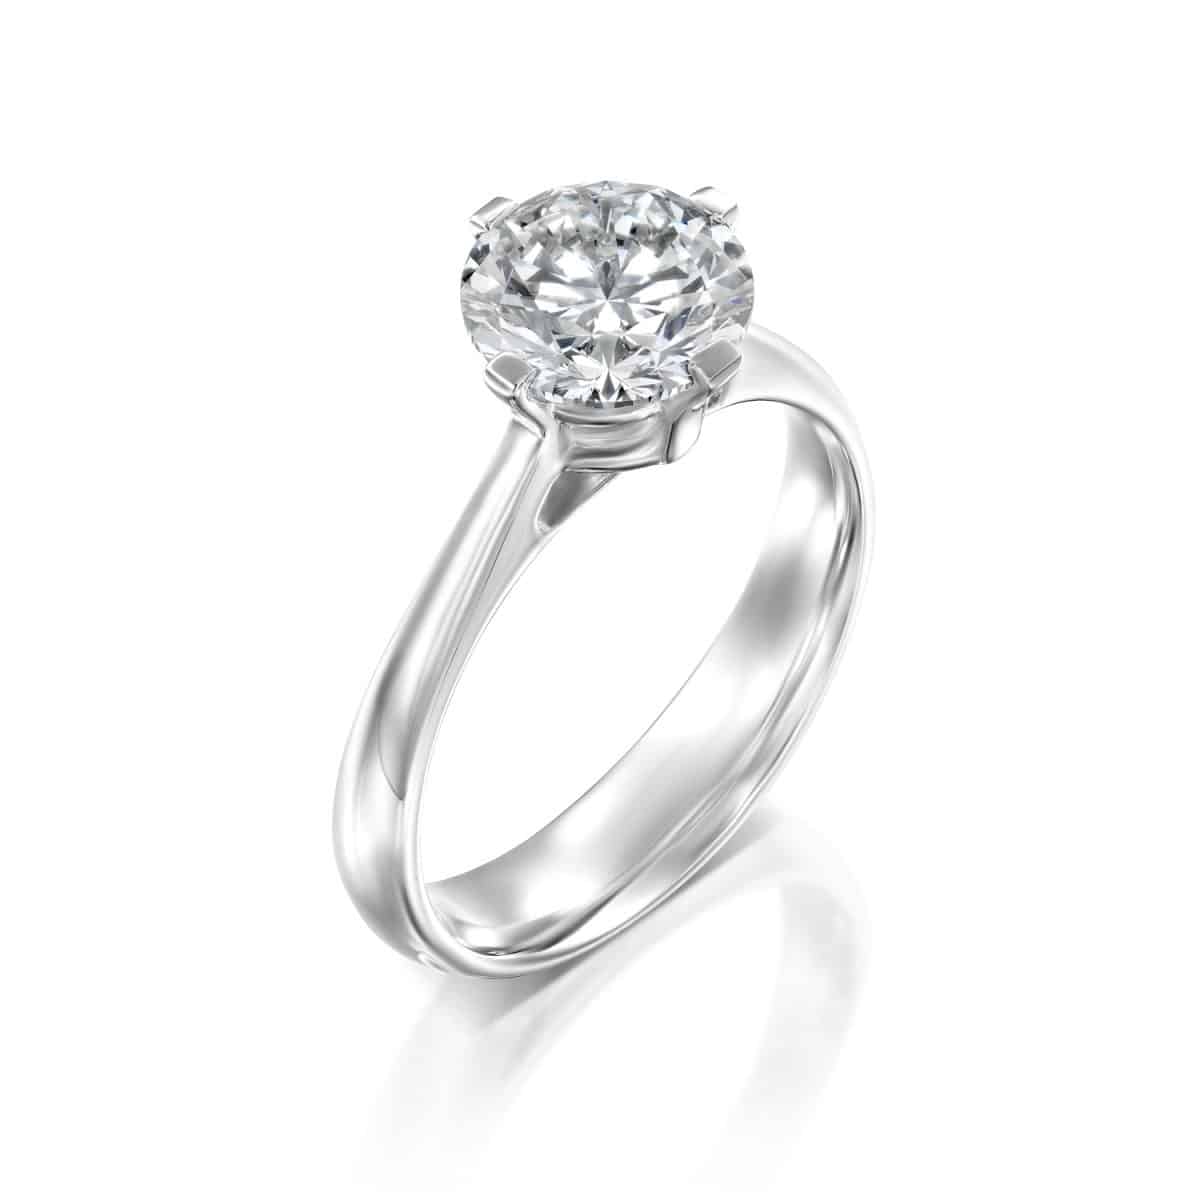 "Mary" - Solitaire Lab Grown Diamond Engagement Ring 1.51ct. - main